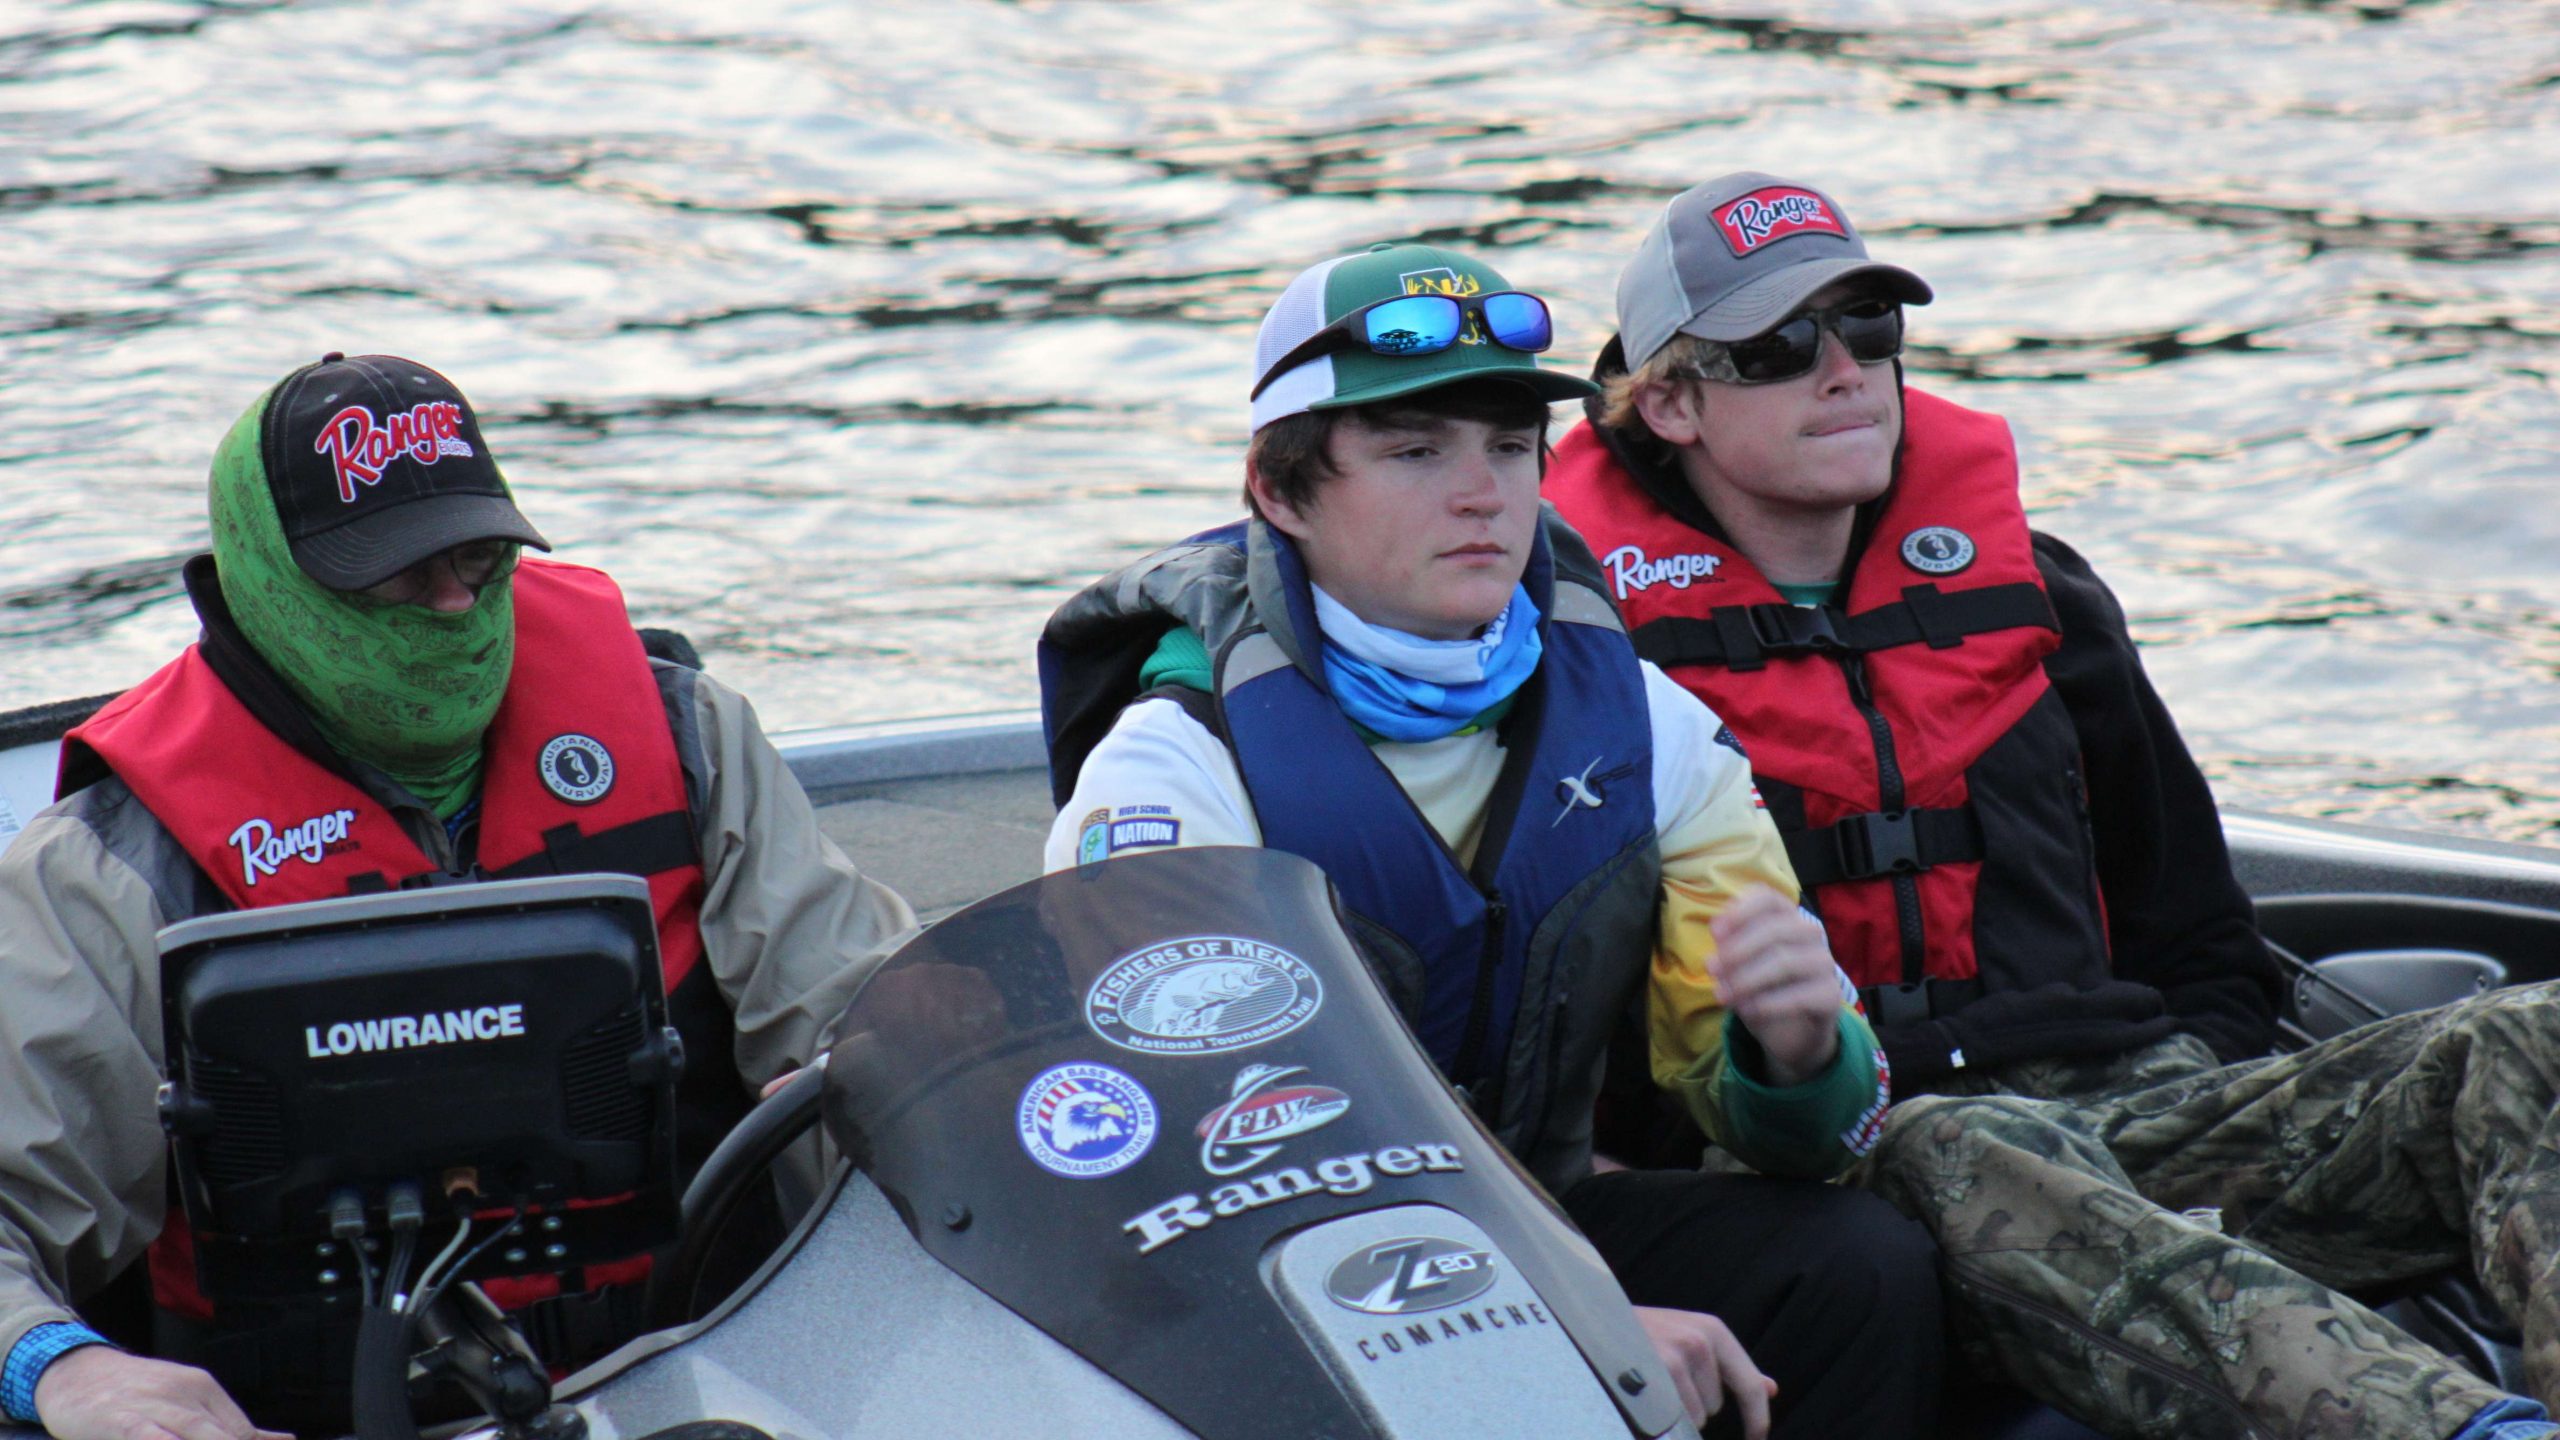  Mason Ferachi and Evan Ruiz are paired in the Costa Bassmaster High School Central Open. They were on Boat 99 on Saturday morning.